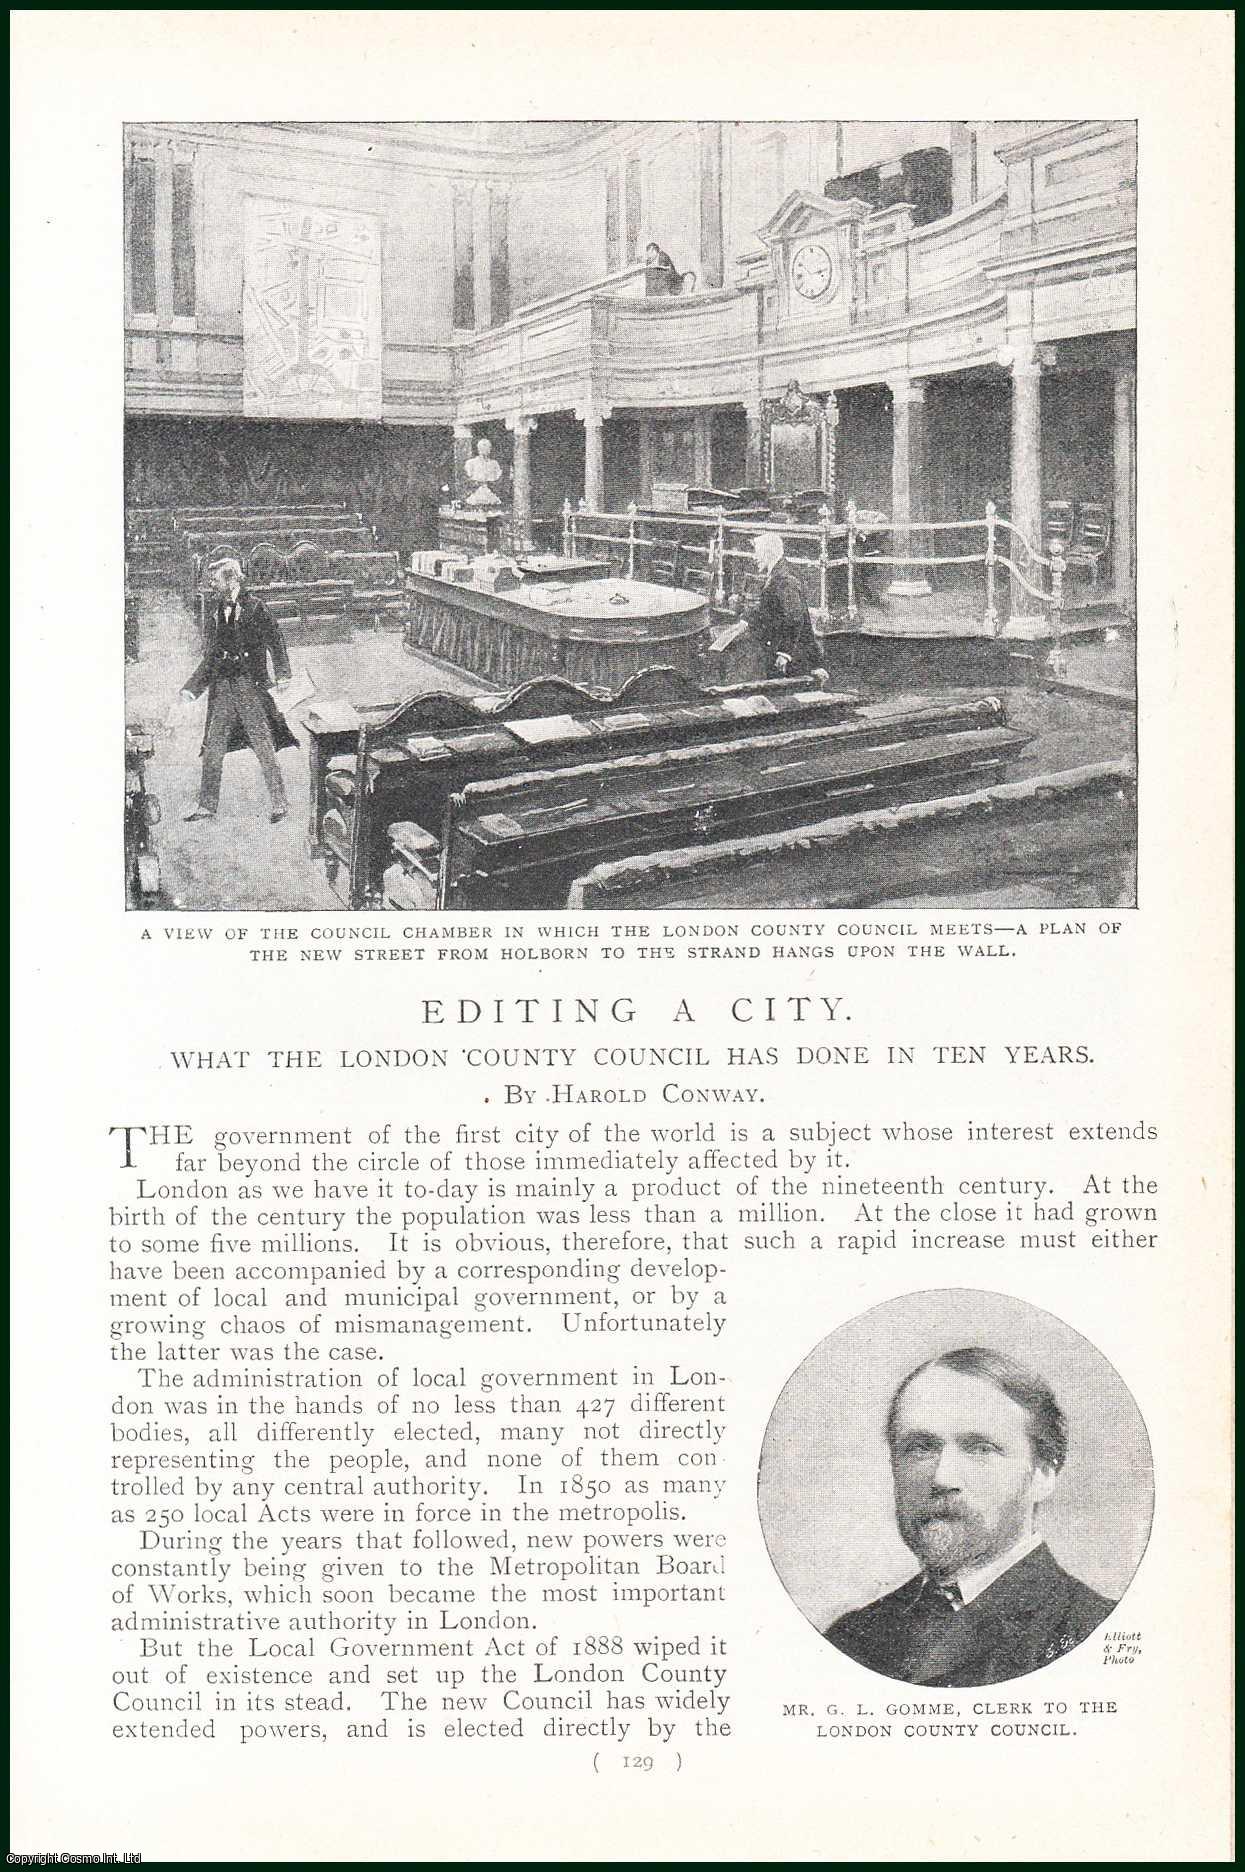 Harold Conway - What The London County Council Has Done in 10 Years : Editing A City. An uncommon original article from the Harmsworth London Magazine, 1901.